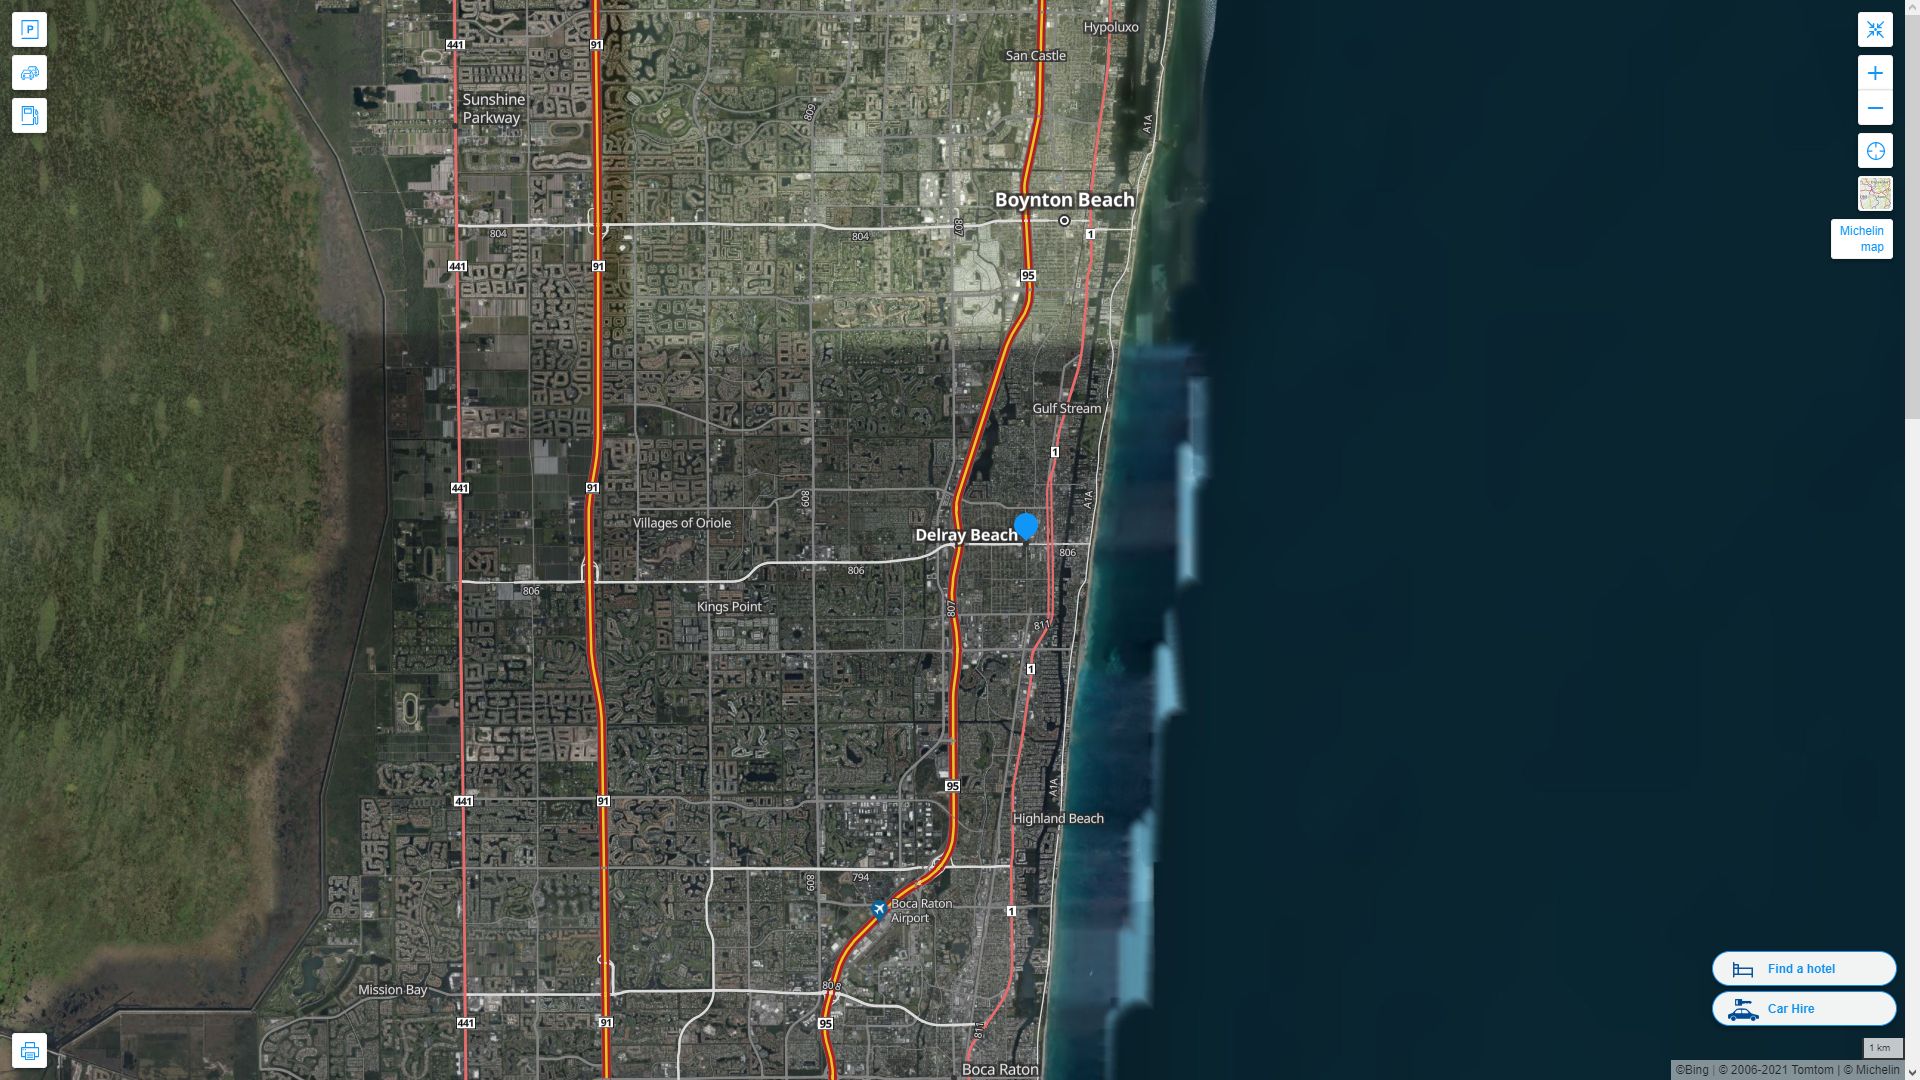 Delray Beach Florida Highway and Road Map with Satellite View